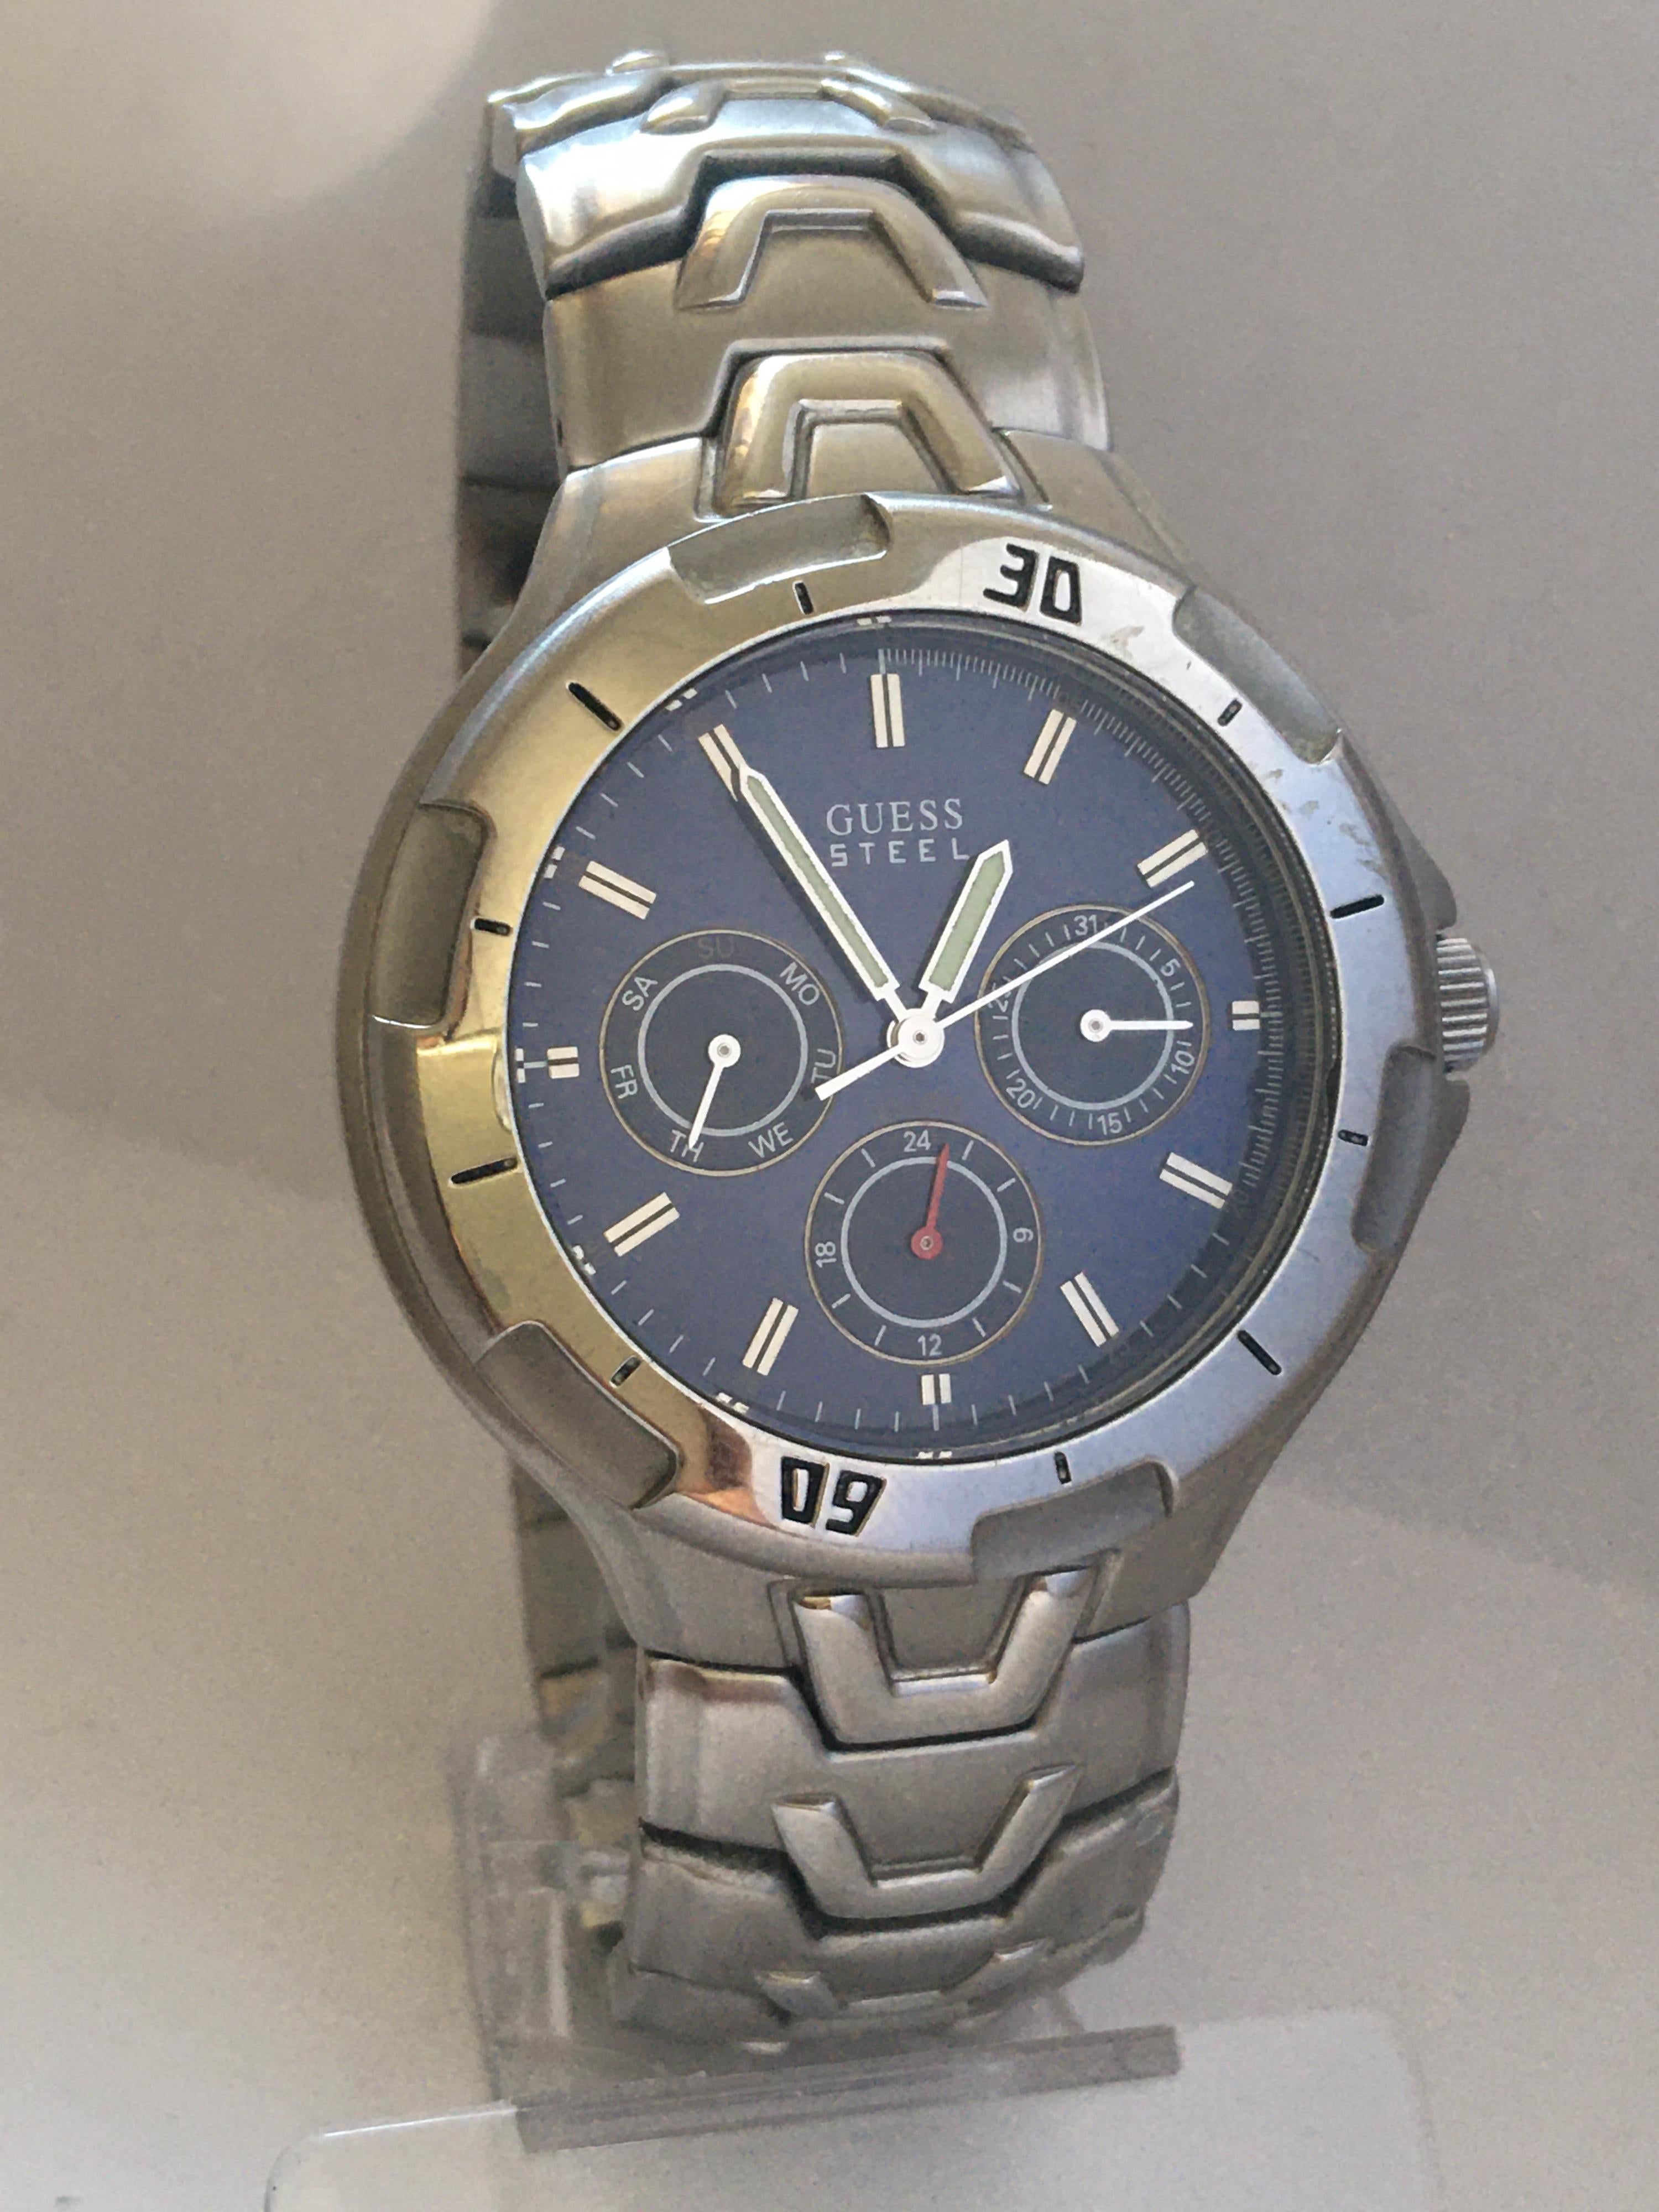 This beautiful pre-owned battery operated blue dial and stainless steel men’s watch is working and running well. Visible scratches on the strap as shown.

Please study the images carefully as form part of the description. 